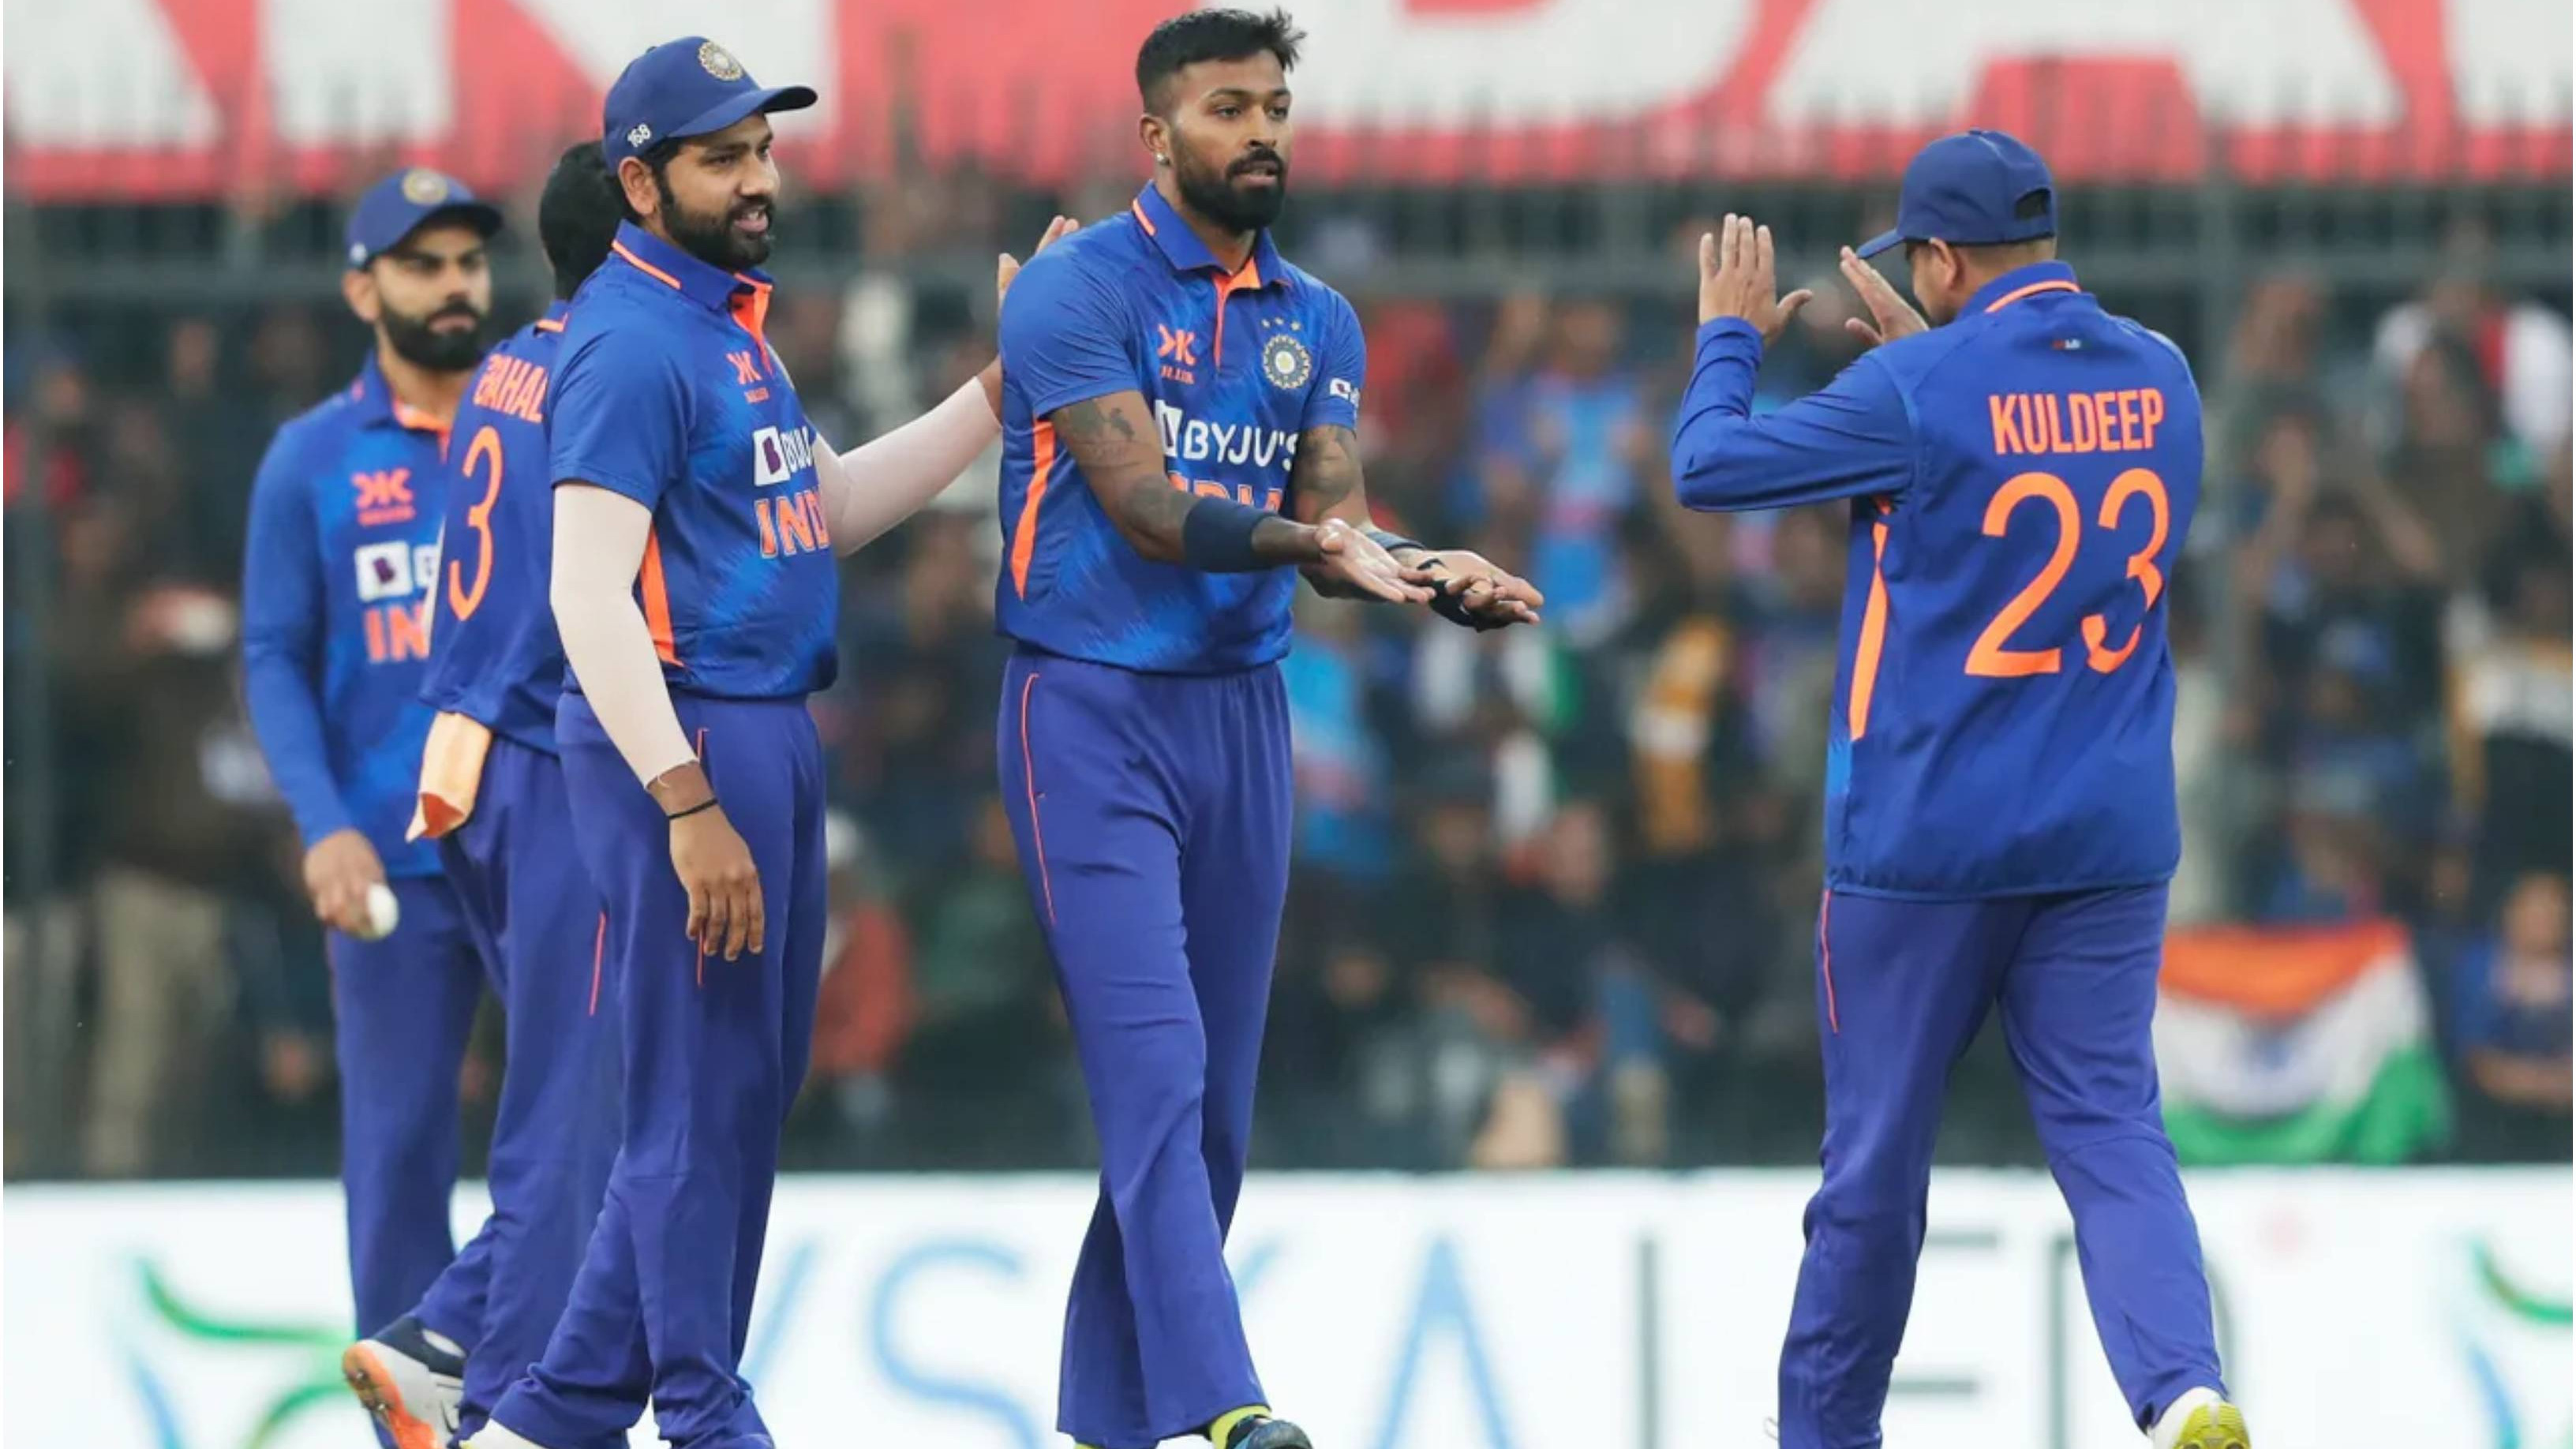 IND v NZ 2023: “Getting satisfaction from swinging the ball both ways,” Hardik Pandya after India’s 3-0 ODI series win